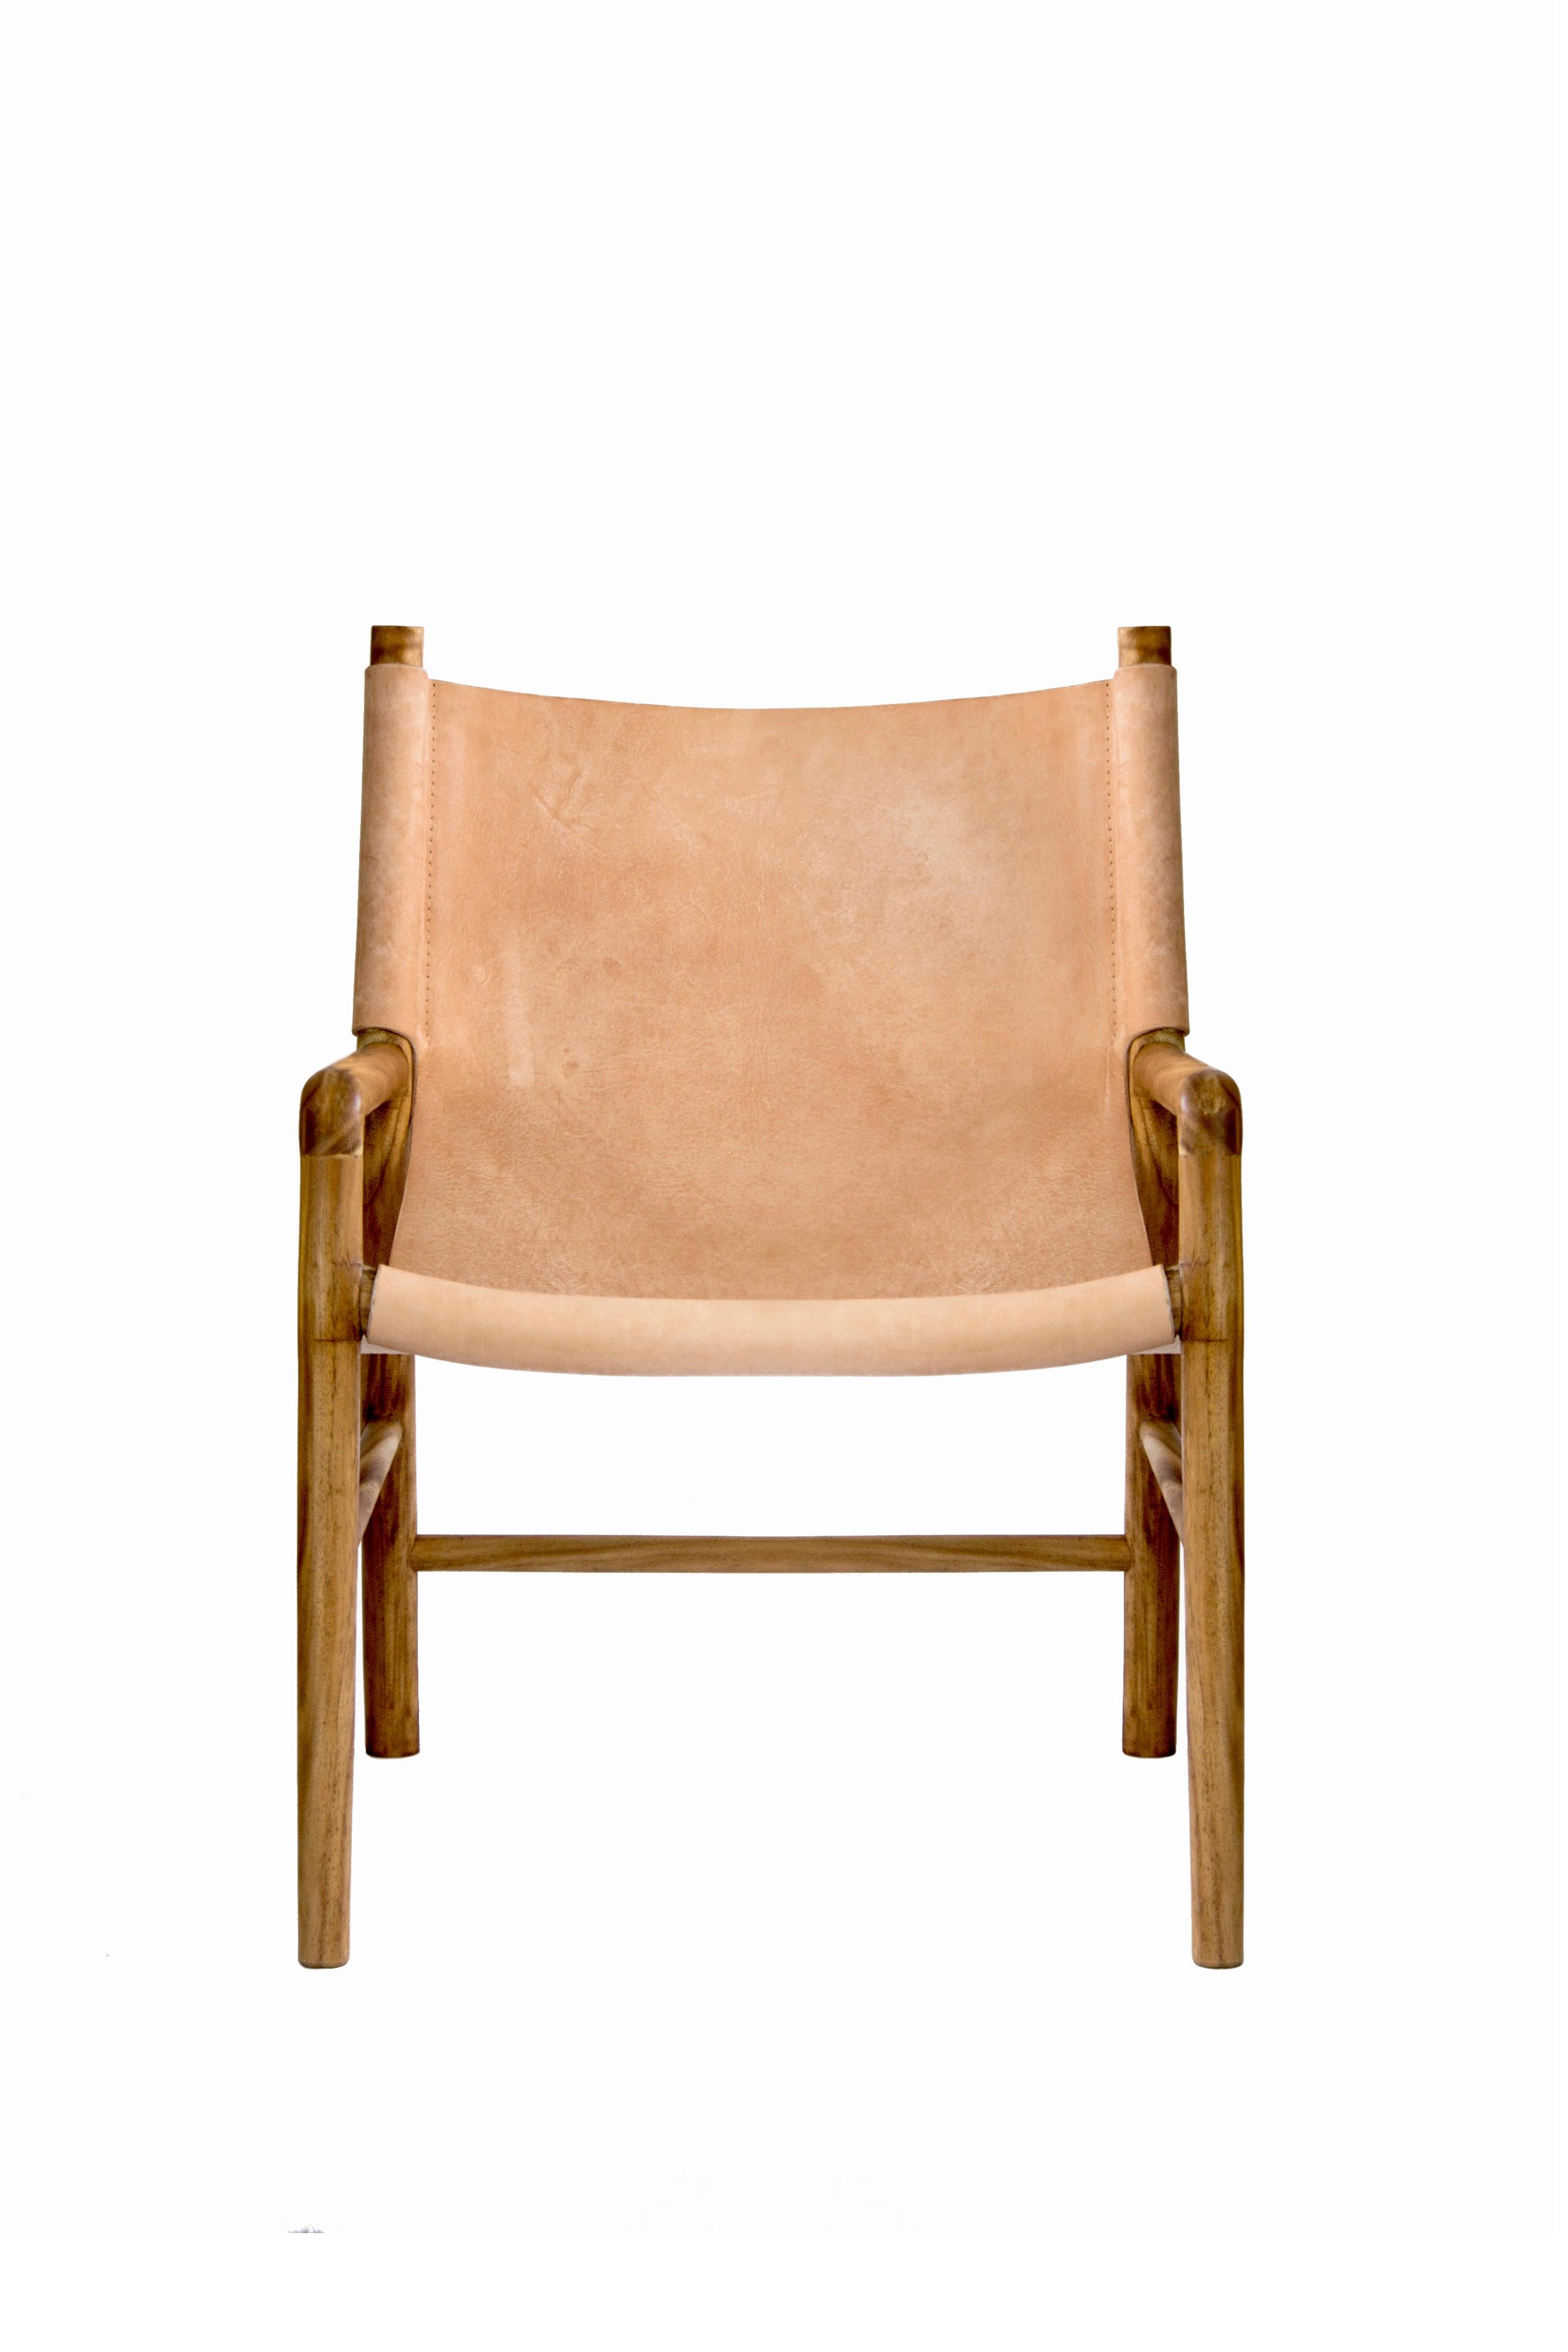 Organic Modern Handcrafted BN01 Side Chair, Tropical Tzalam Wood & Natural Leather For Sale